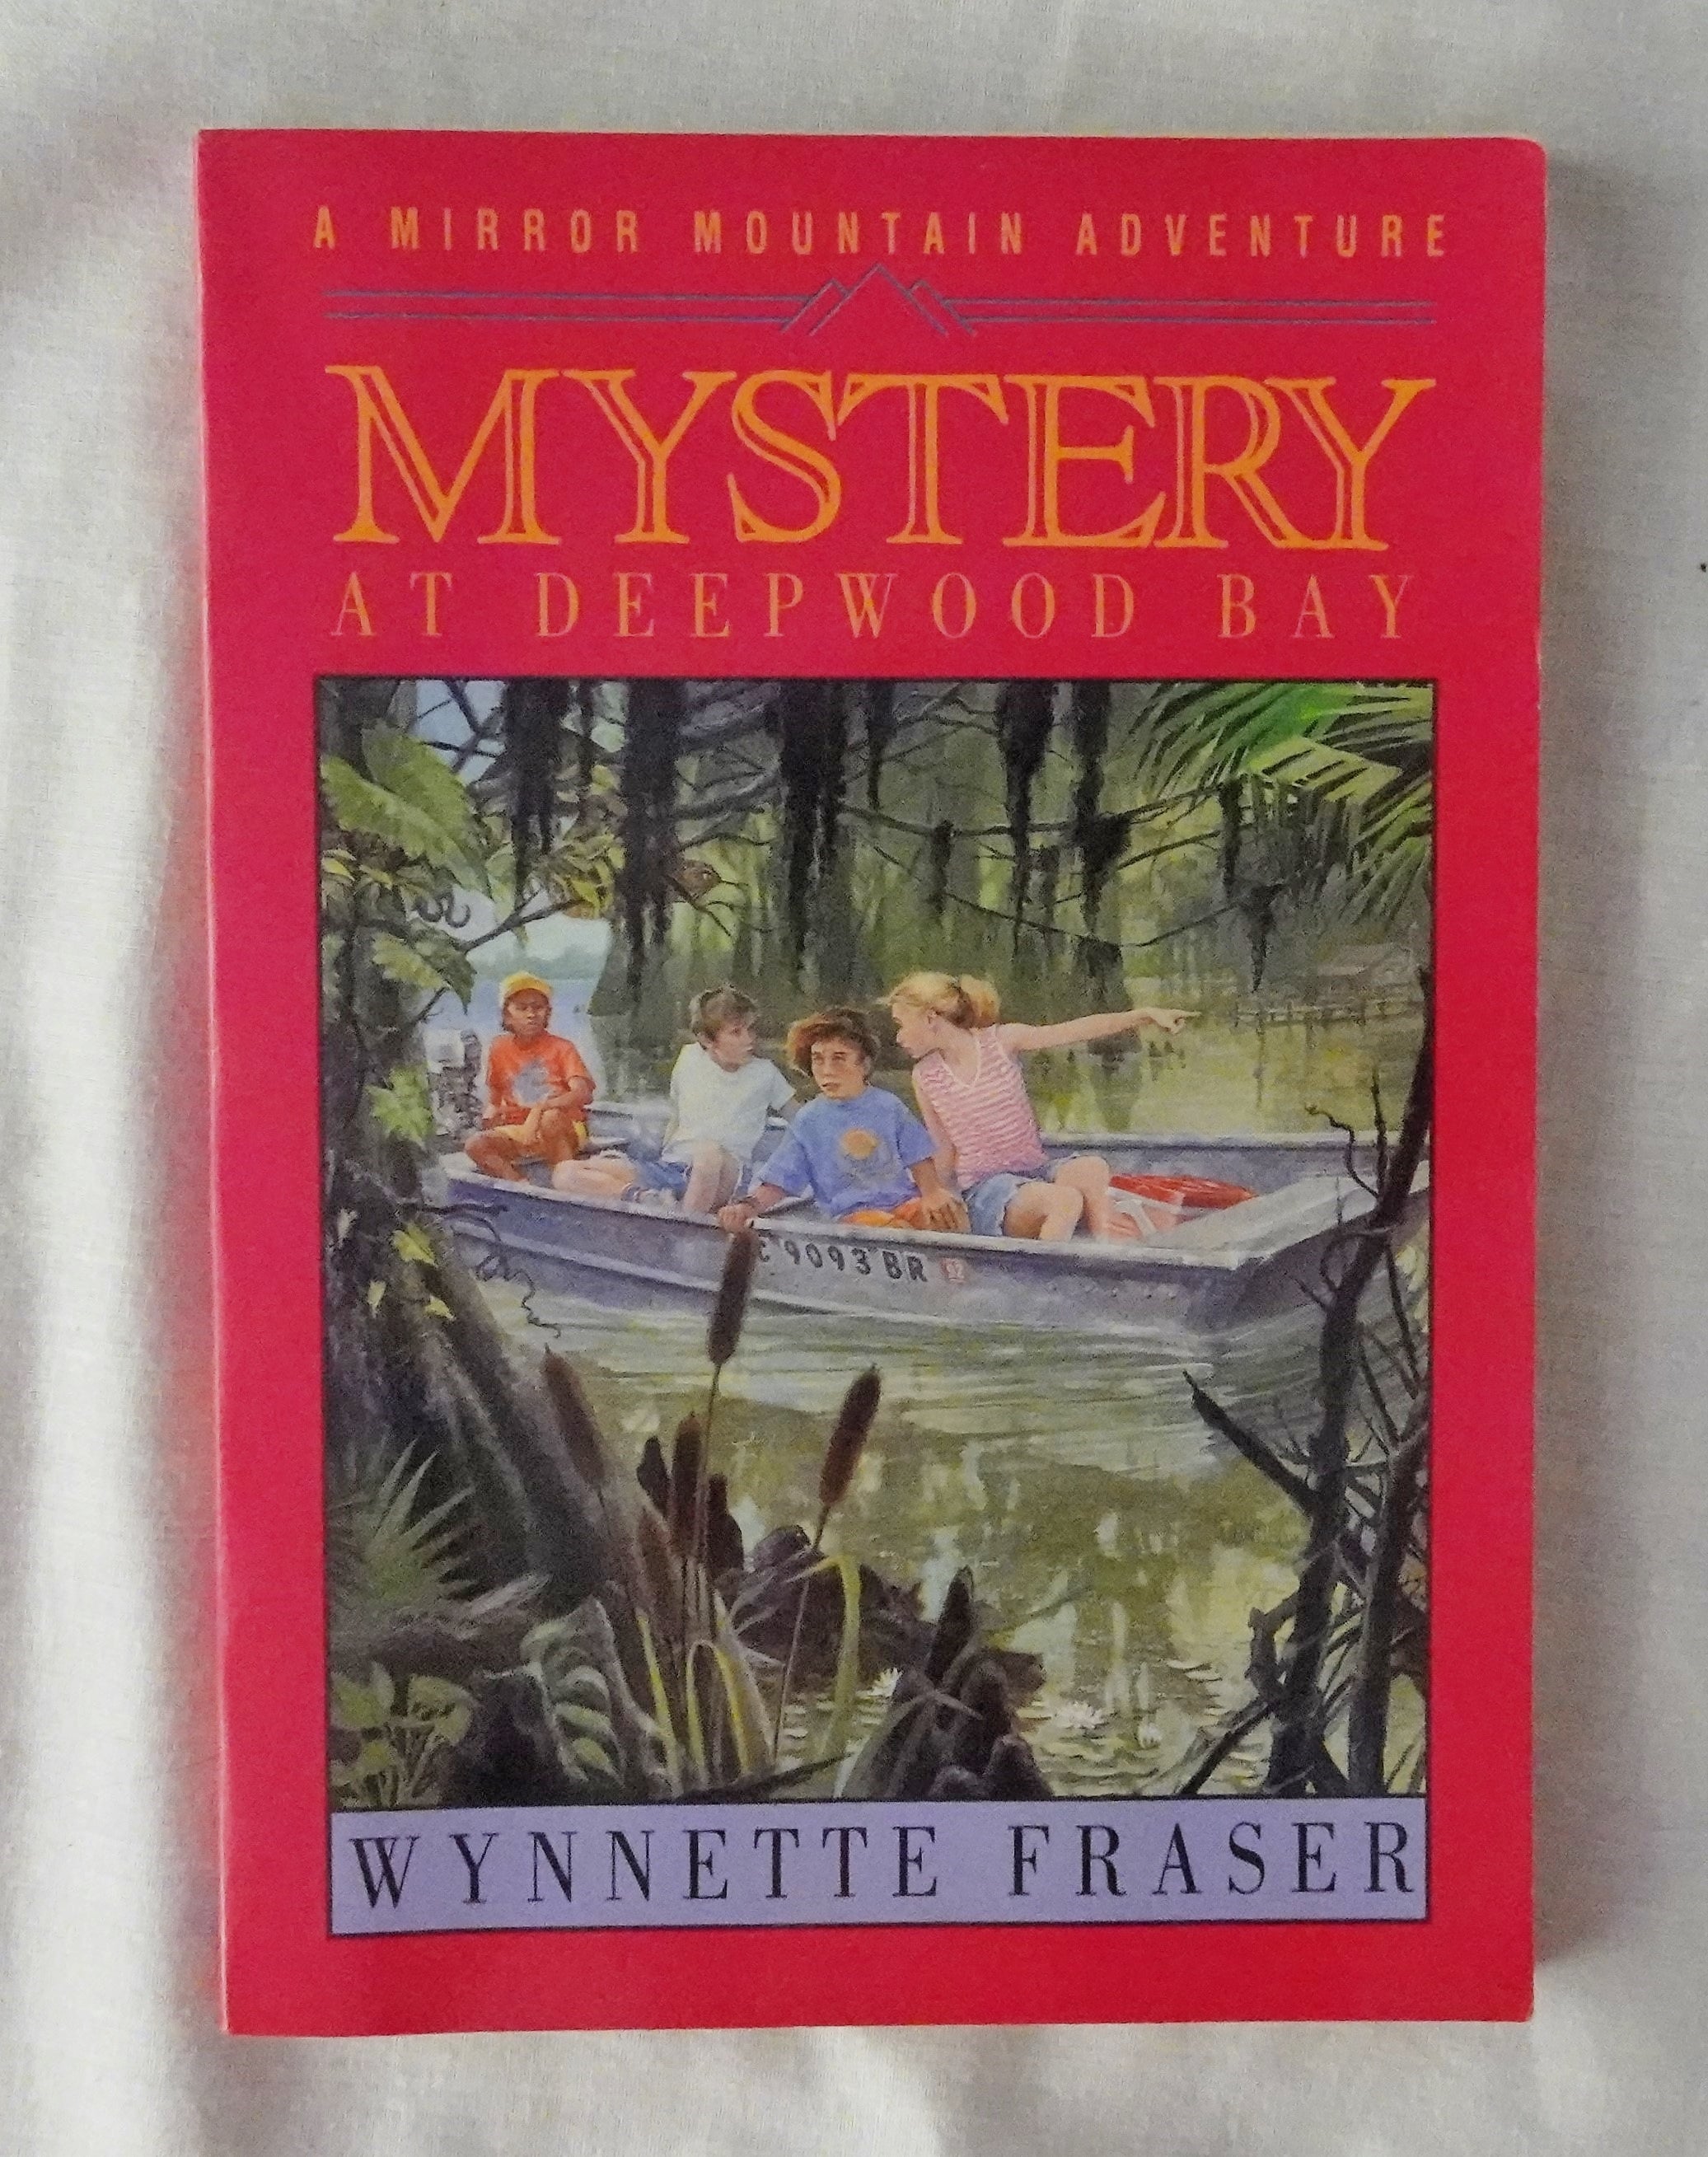 Fraser　by　–　Rare　Deepwood　Bay　Books　Wynette　Morgan's　Mystery　at